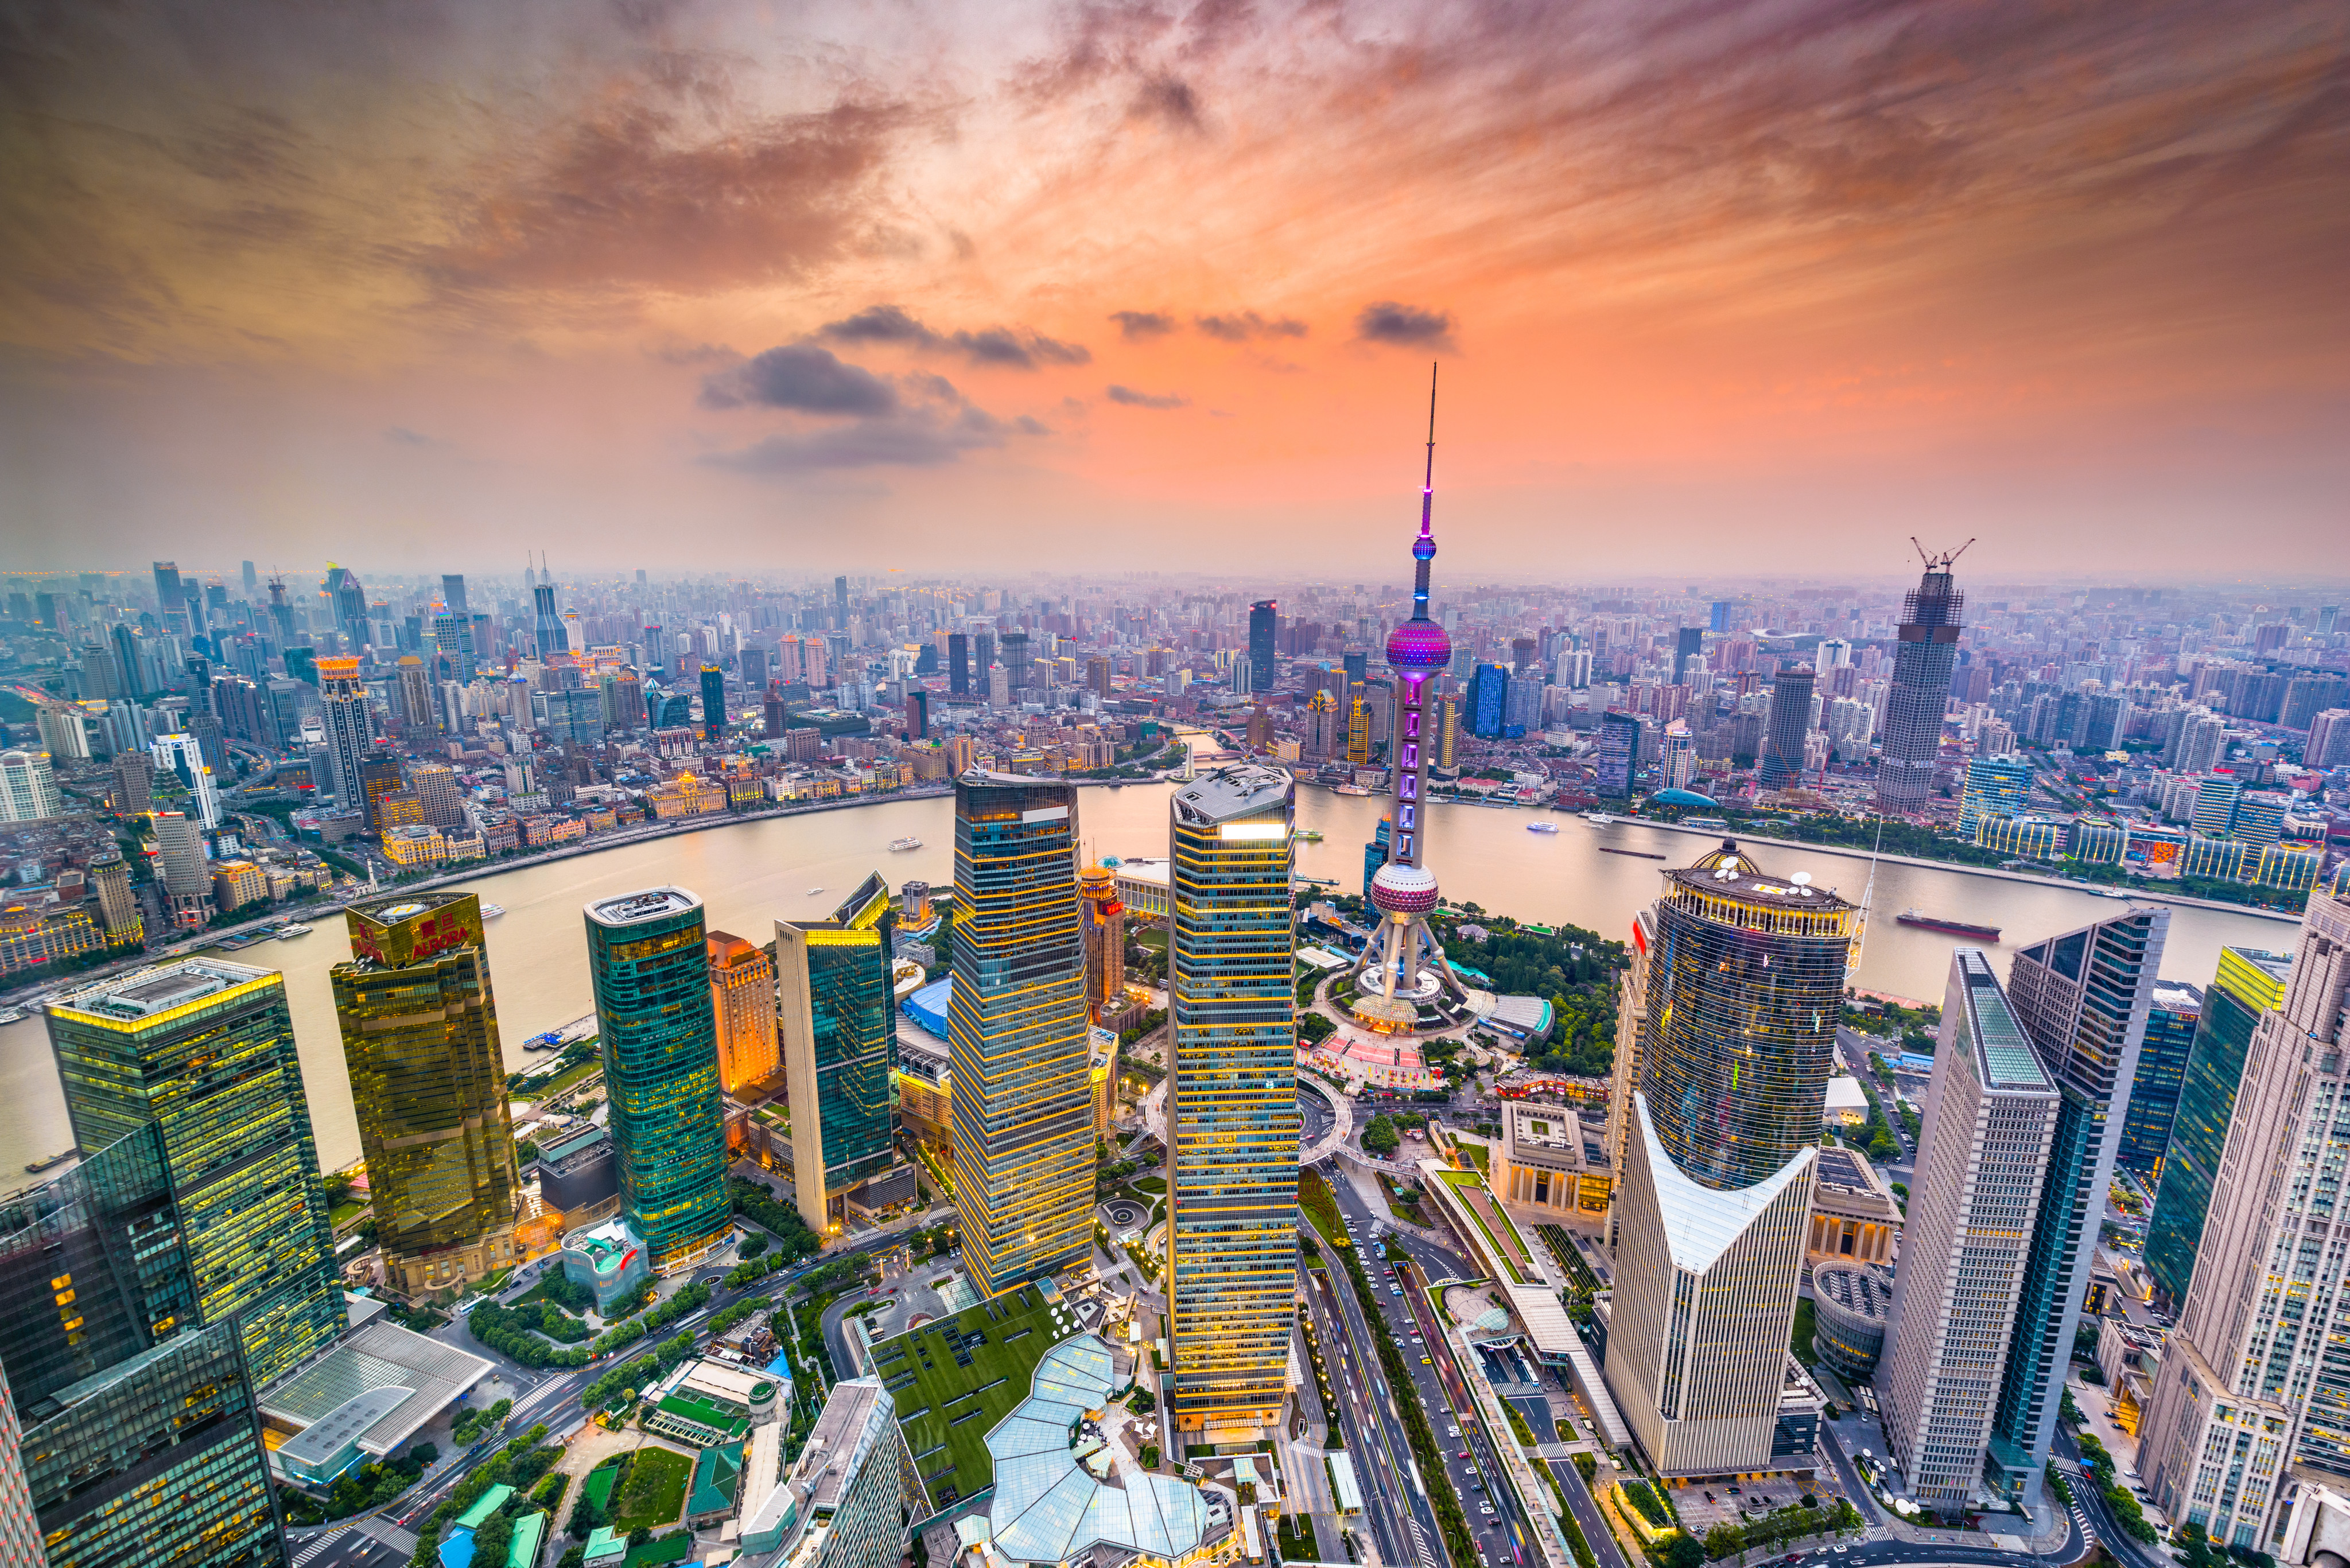 Shanghai’s first auction this year showed that state-owned and state-backed developers are currently the main force in land acquisition. Photo: Shutterstock